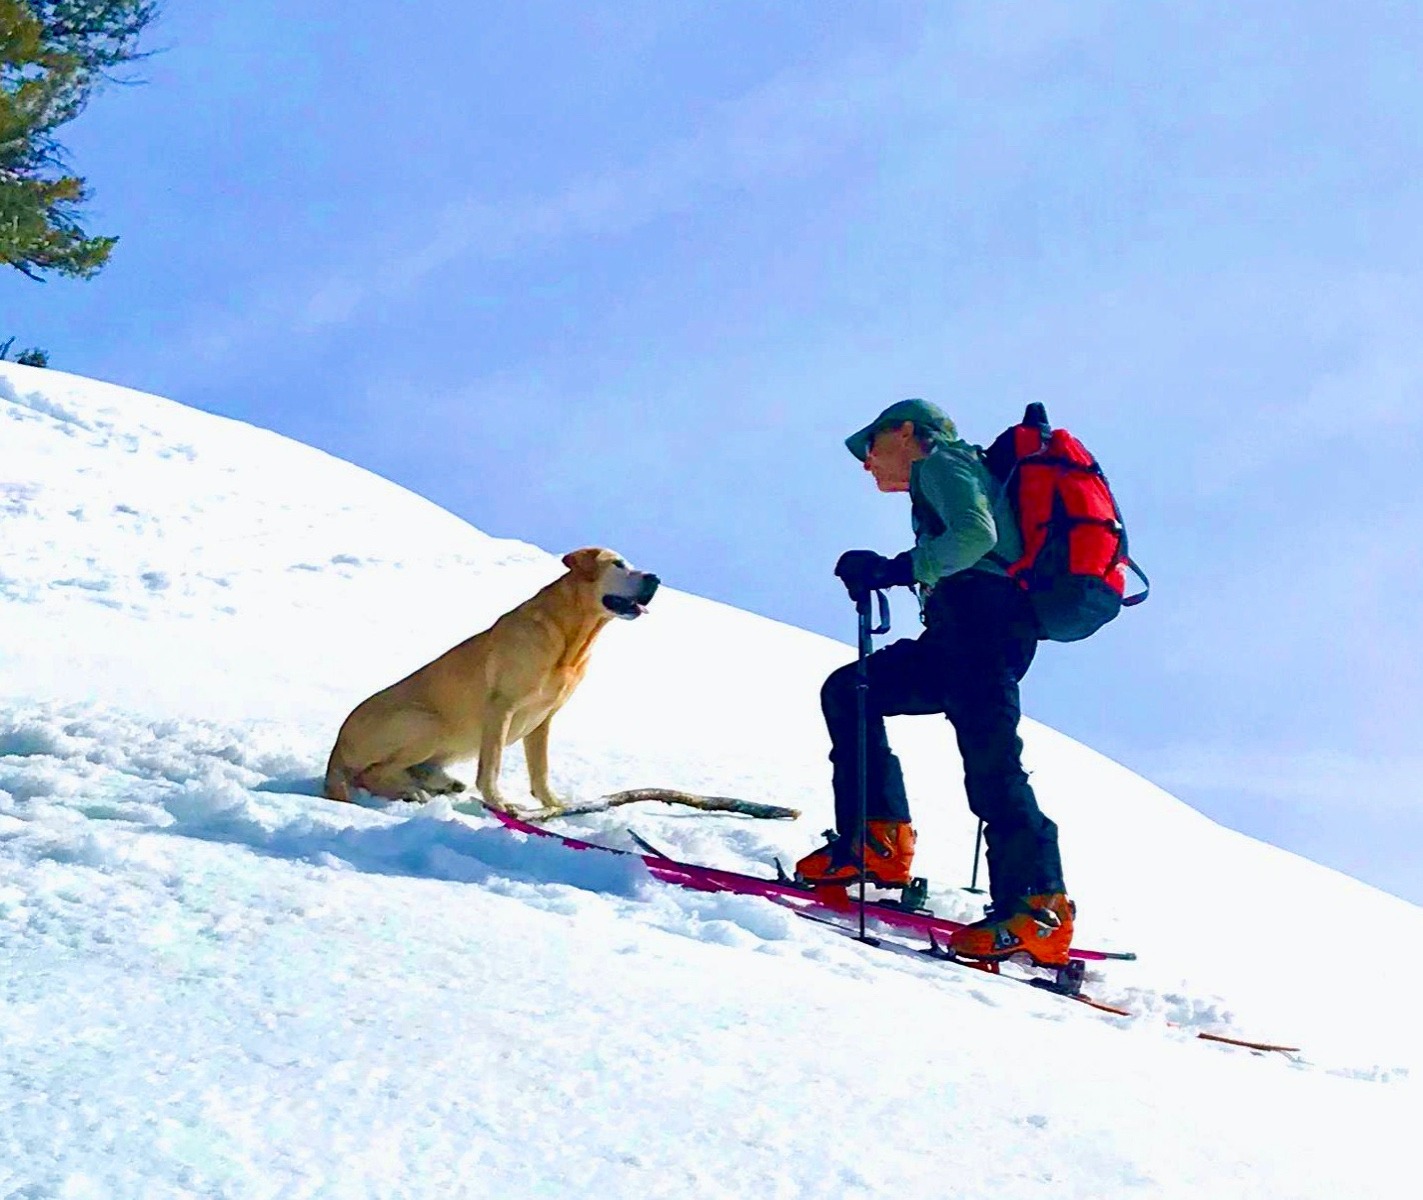 The author and his dog, Pukka, during a ski together in winter 2019 in Jackson Hole marking the occasion of both of their birthdays.  Photo by Marian Meyers